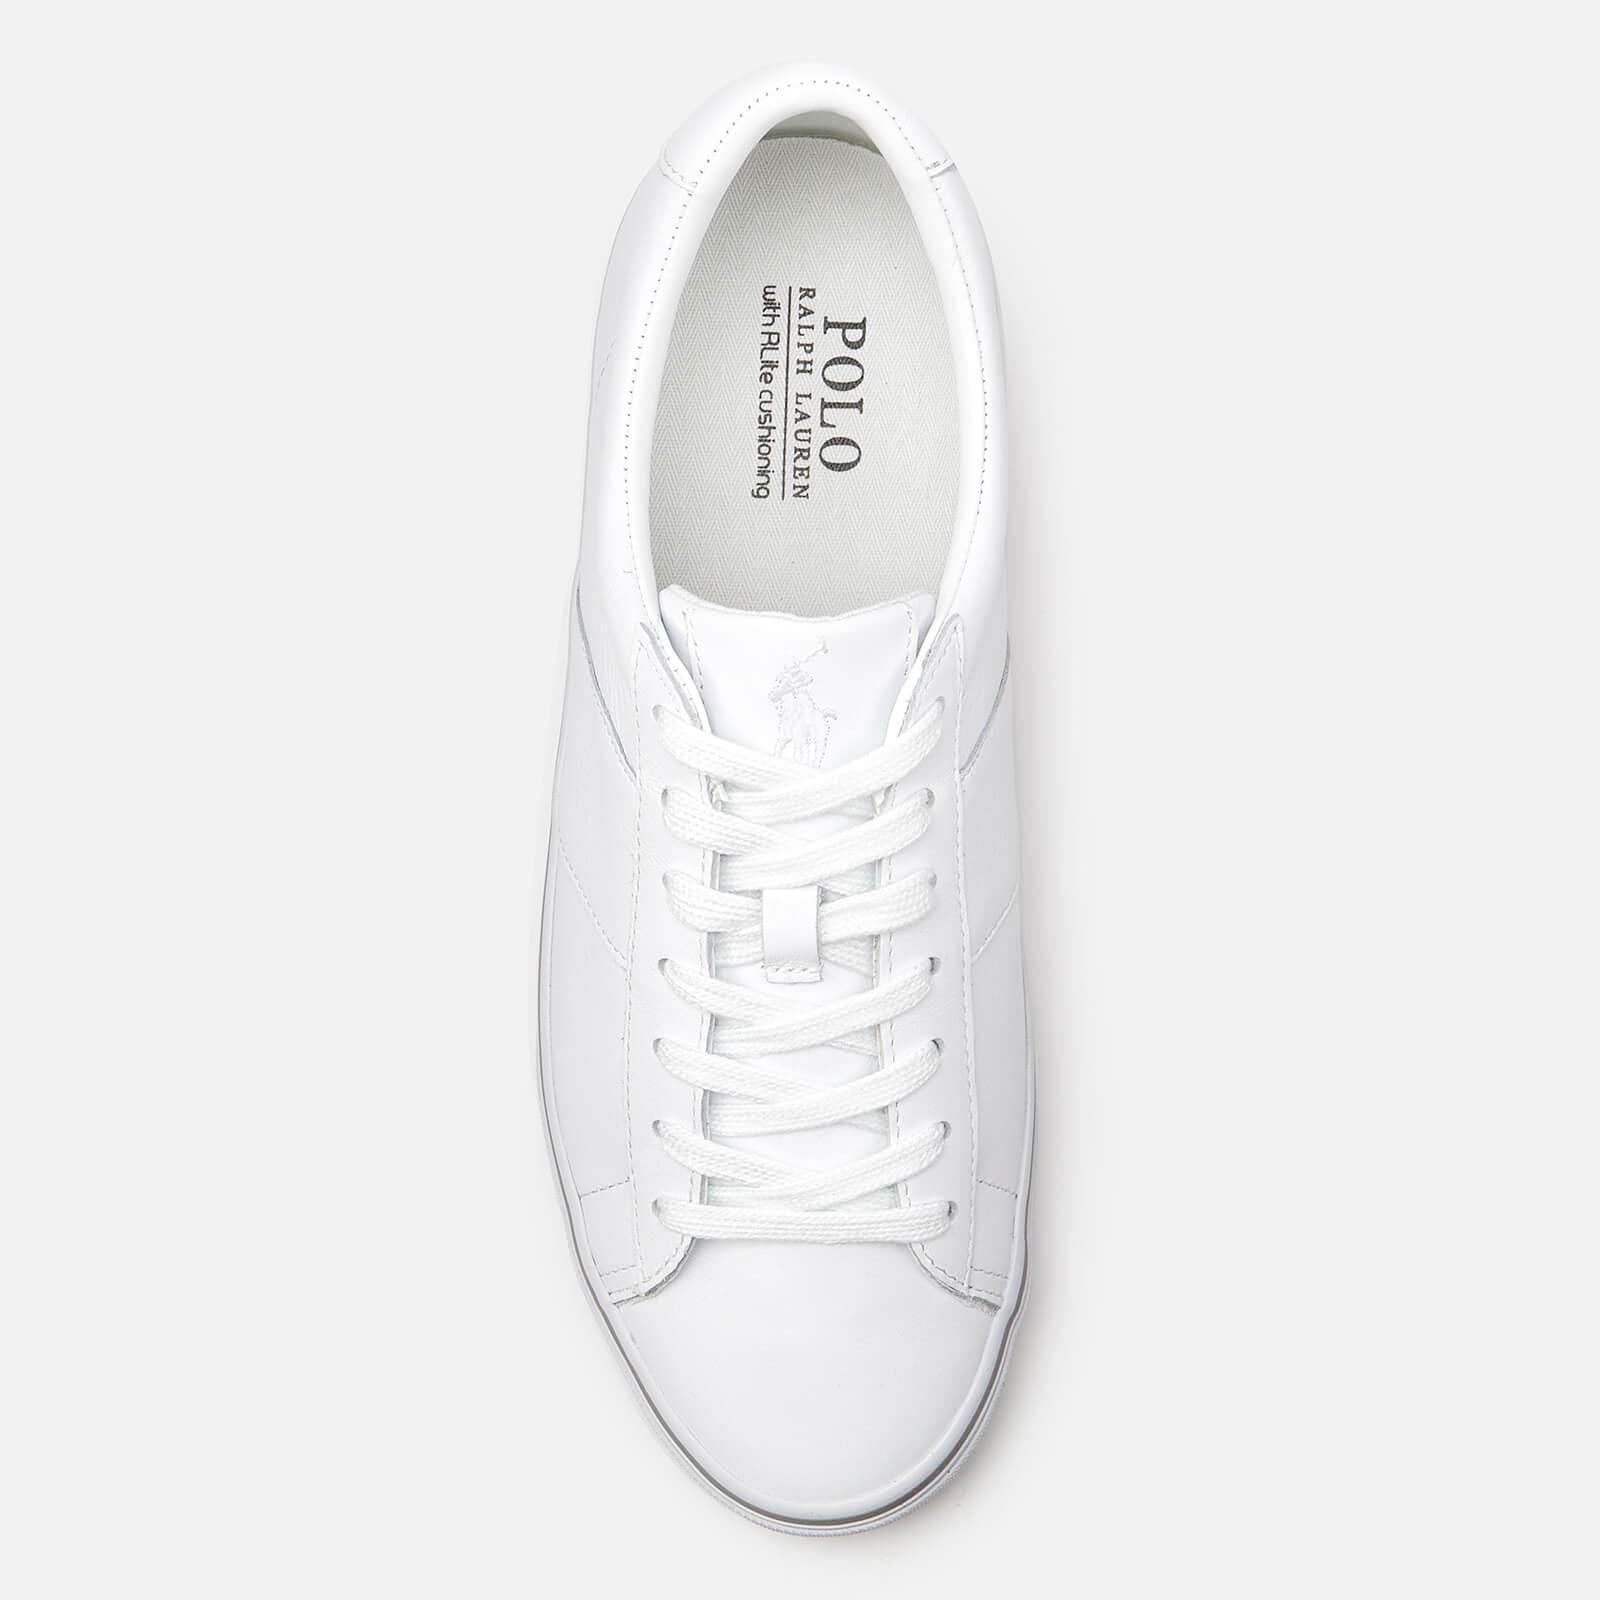 Polo Ralph Lauren Sayer Leather Trainers in White for Men - Lyst